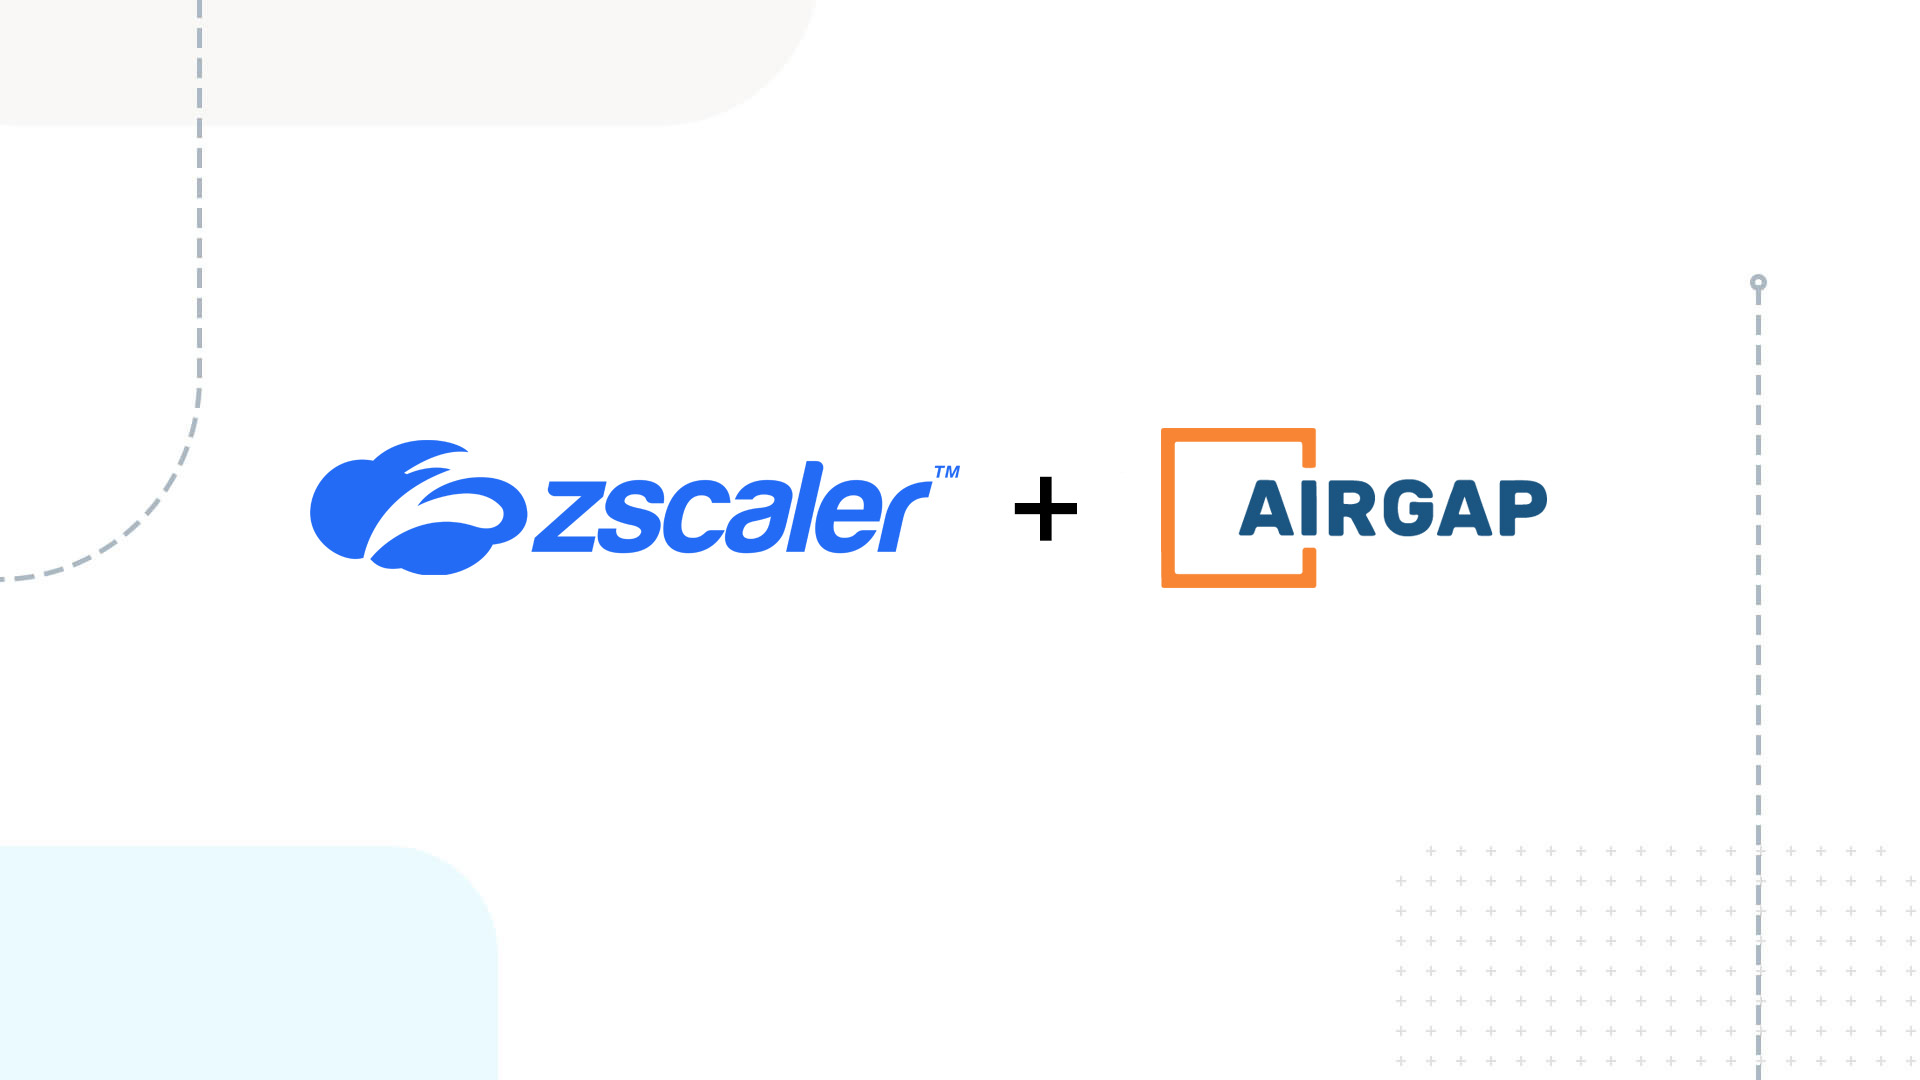 Zscaler Announces Intent to Acquire Airgap Networks to Extend Zero Trust SASE Leadership and Eliminate the Need for Firewall-based Segmentation